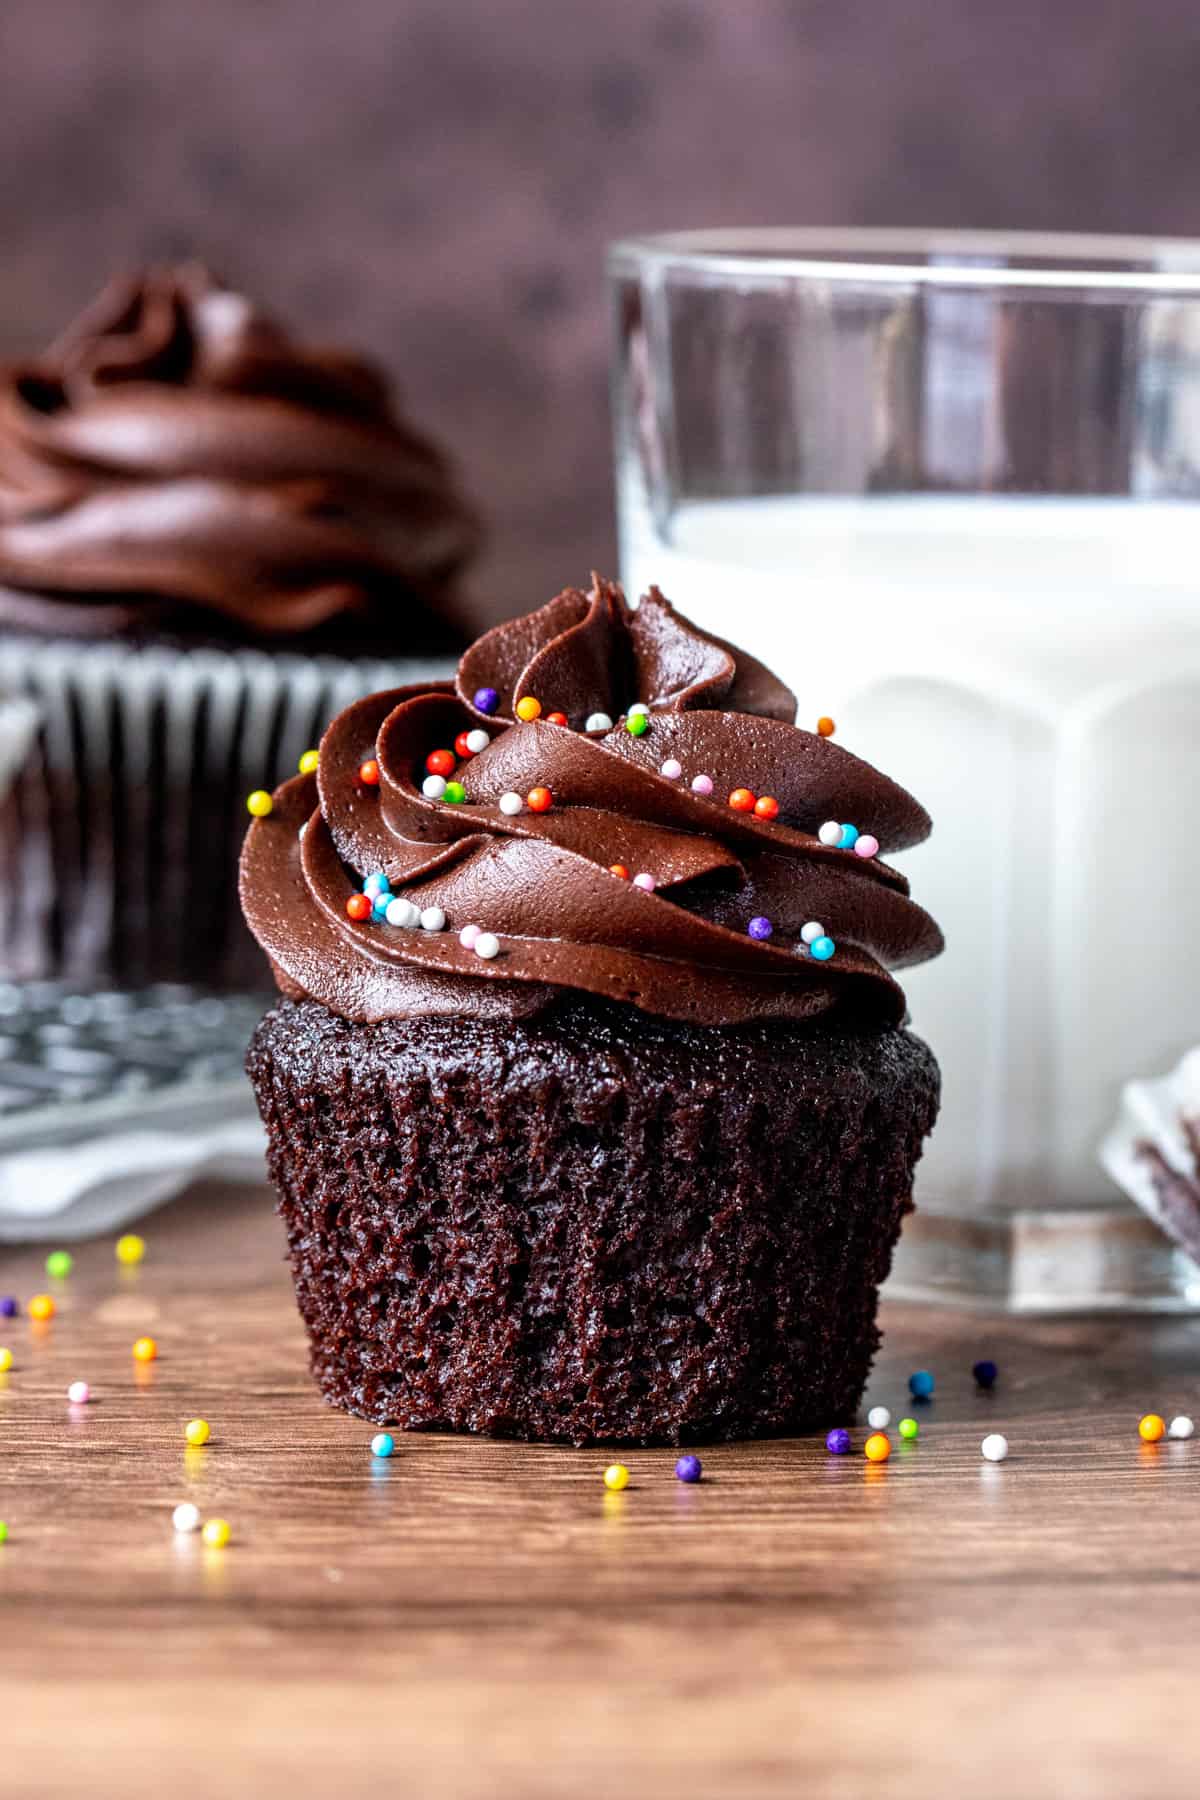 Chocolate cupcake with paper removed beside glass of milk